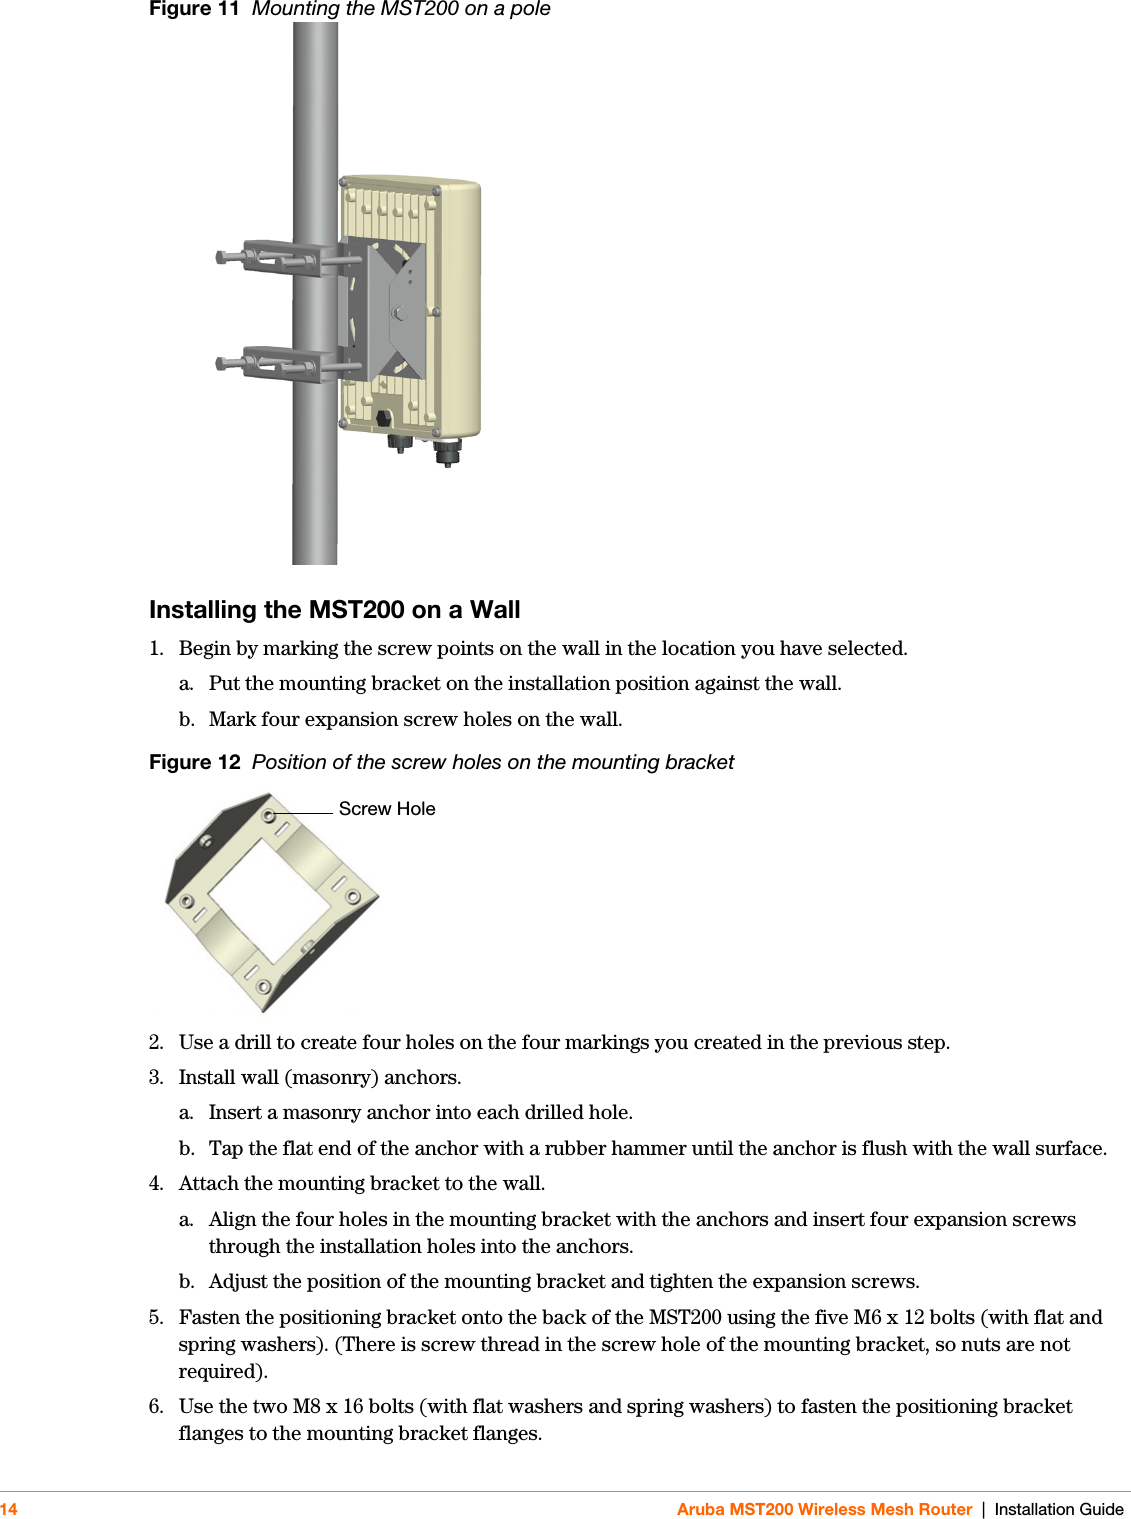 14 Aruba MST200 Wireless Mesh Router | Installation GuideFigure 11  Mounting the MST200 on a pole Installing the MST200 on a Wall1. Begin by marking the screw points on the wall in the location you have selected.a. Put the mounting bracket on the installation position against the wall.b. Mark four expansion screw holes on the wall.Figure 12  Position of the screw holes on the mounting bracket2. Use a drill to create four holes on the four markings you created in the previous step. 3. Install wall (masonry) anchors.a. Insert a masonry anchor into each drilled hole.b. Tap the flat end of the anchor with a rubber hammer until the anchor is flush with the wall surface.4. Attach the mounting bracket to the wall.a. Align the four holes in the mounting bracket with the anchors and insert four expansion screws through the installation holes into the anchors. b. Adjust the position of the mounting bracket and tighten the expansion screws. 5. Fasten the positioning bracket onto the back of the MST200 using the five M6 x 12 bolts (with flat and spring washers). (There is screw thread in the screw hole of the mounting bracket, so nuts are not required).6. Use the two M8 x 16 bolts (with flat washers and spring washers) to fasten the positioning bracket flanges to the mounting bracket flanges. Screw Hole